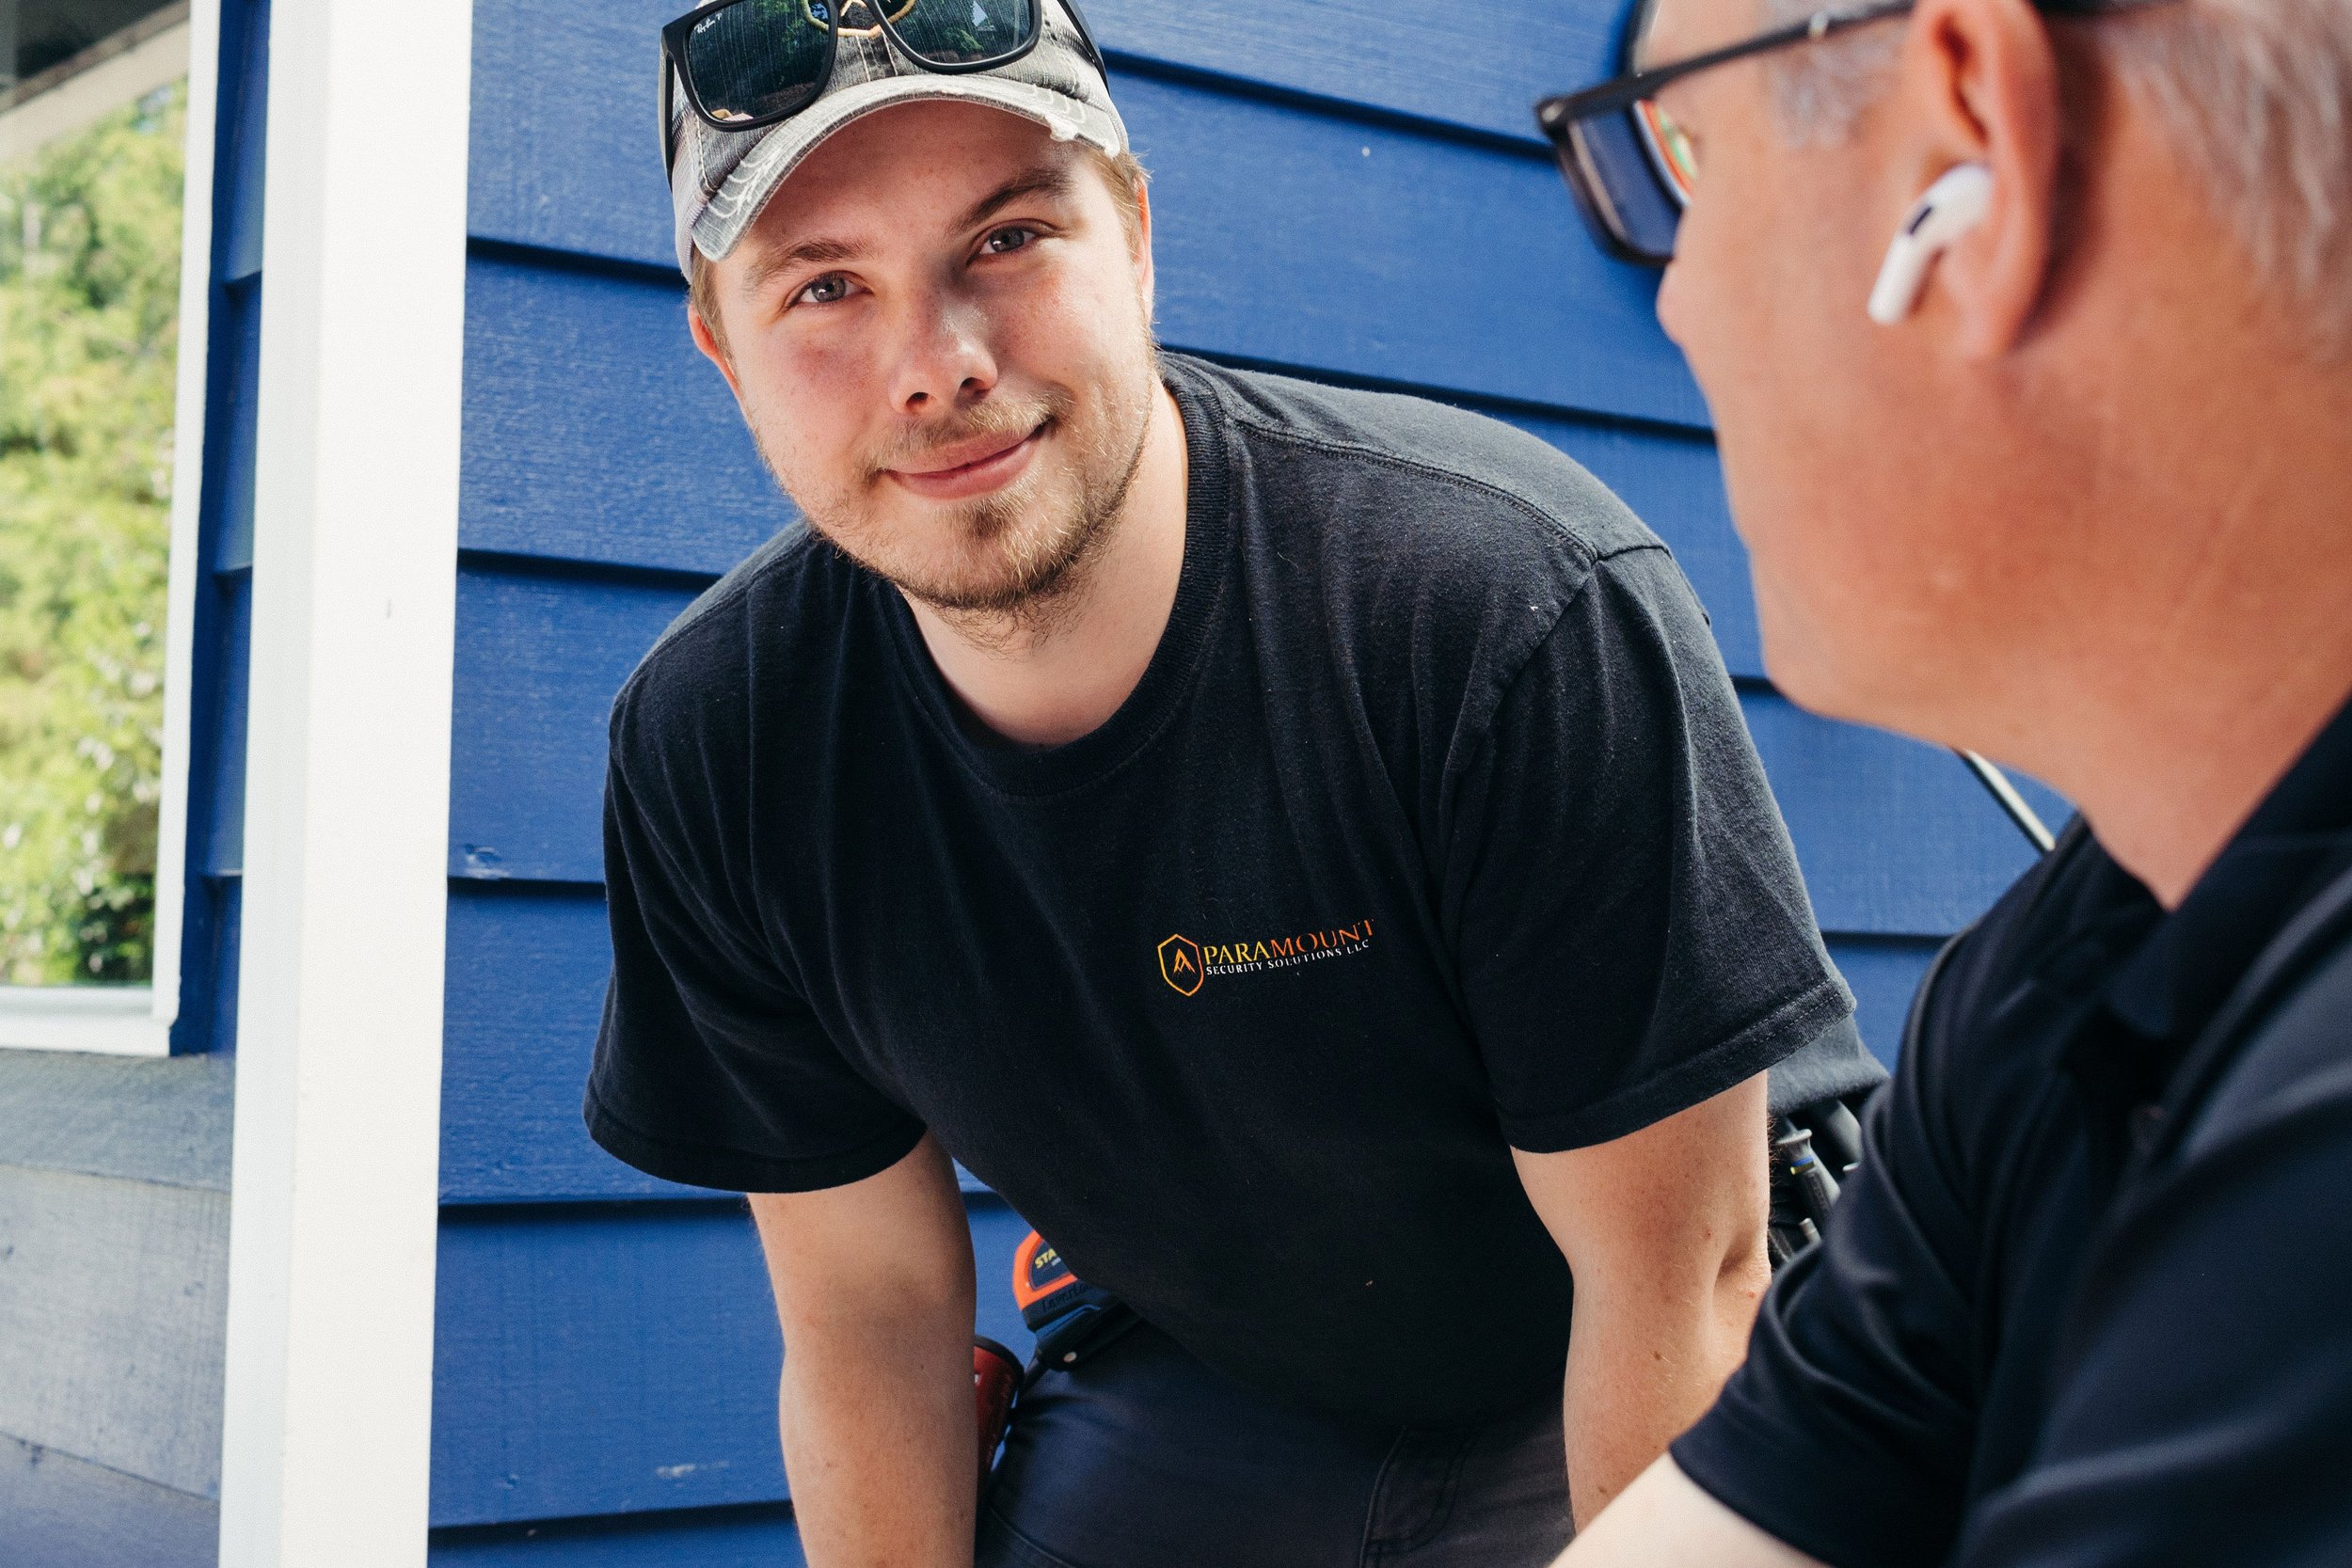 A branding photoshoot for Paramount brand workers captures two workers in the company’s black shirts